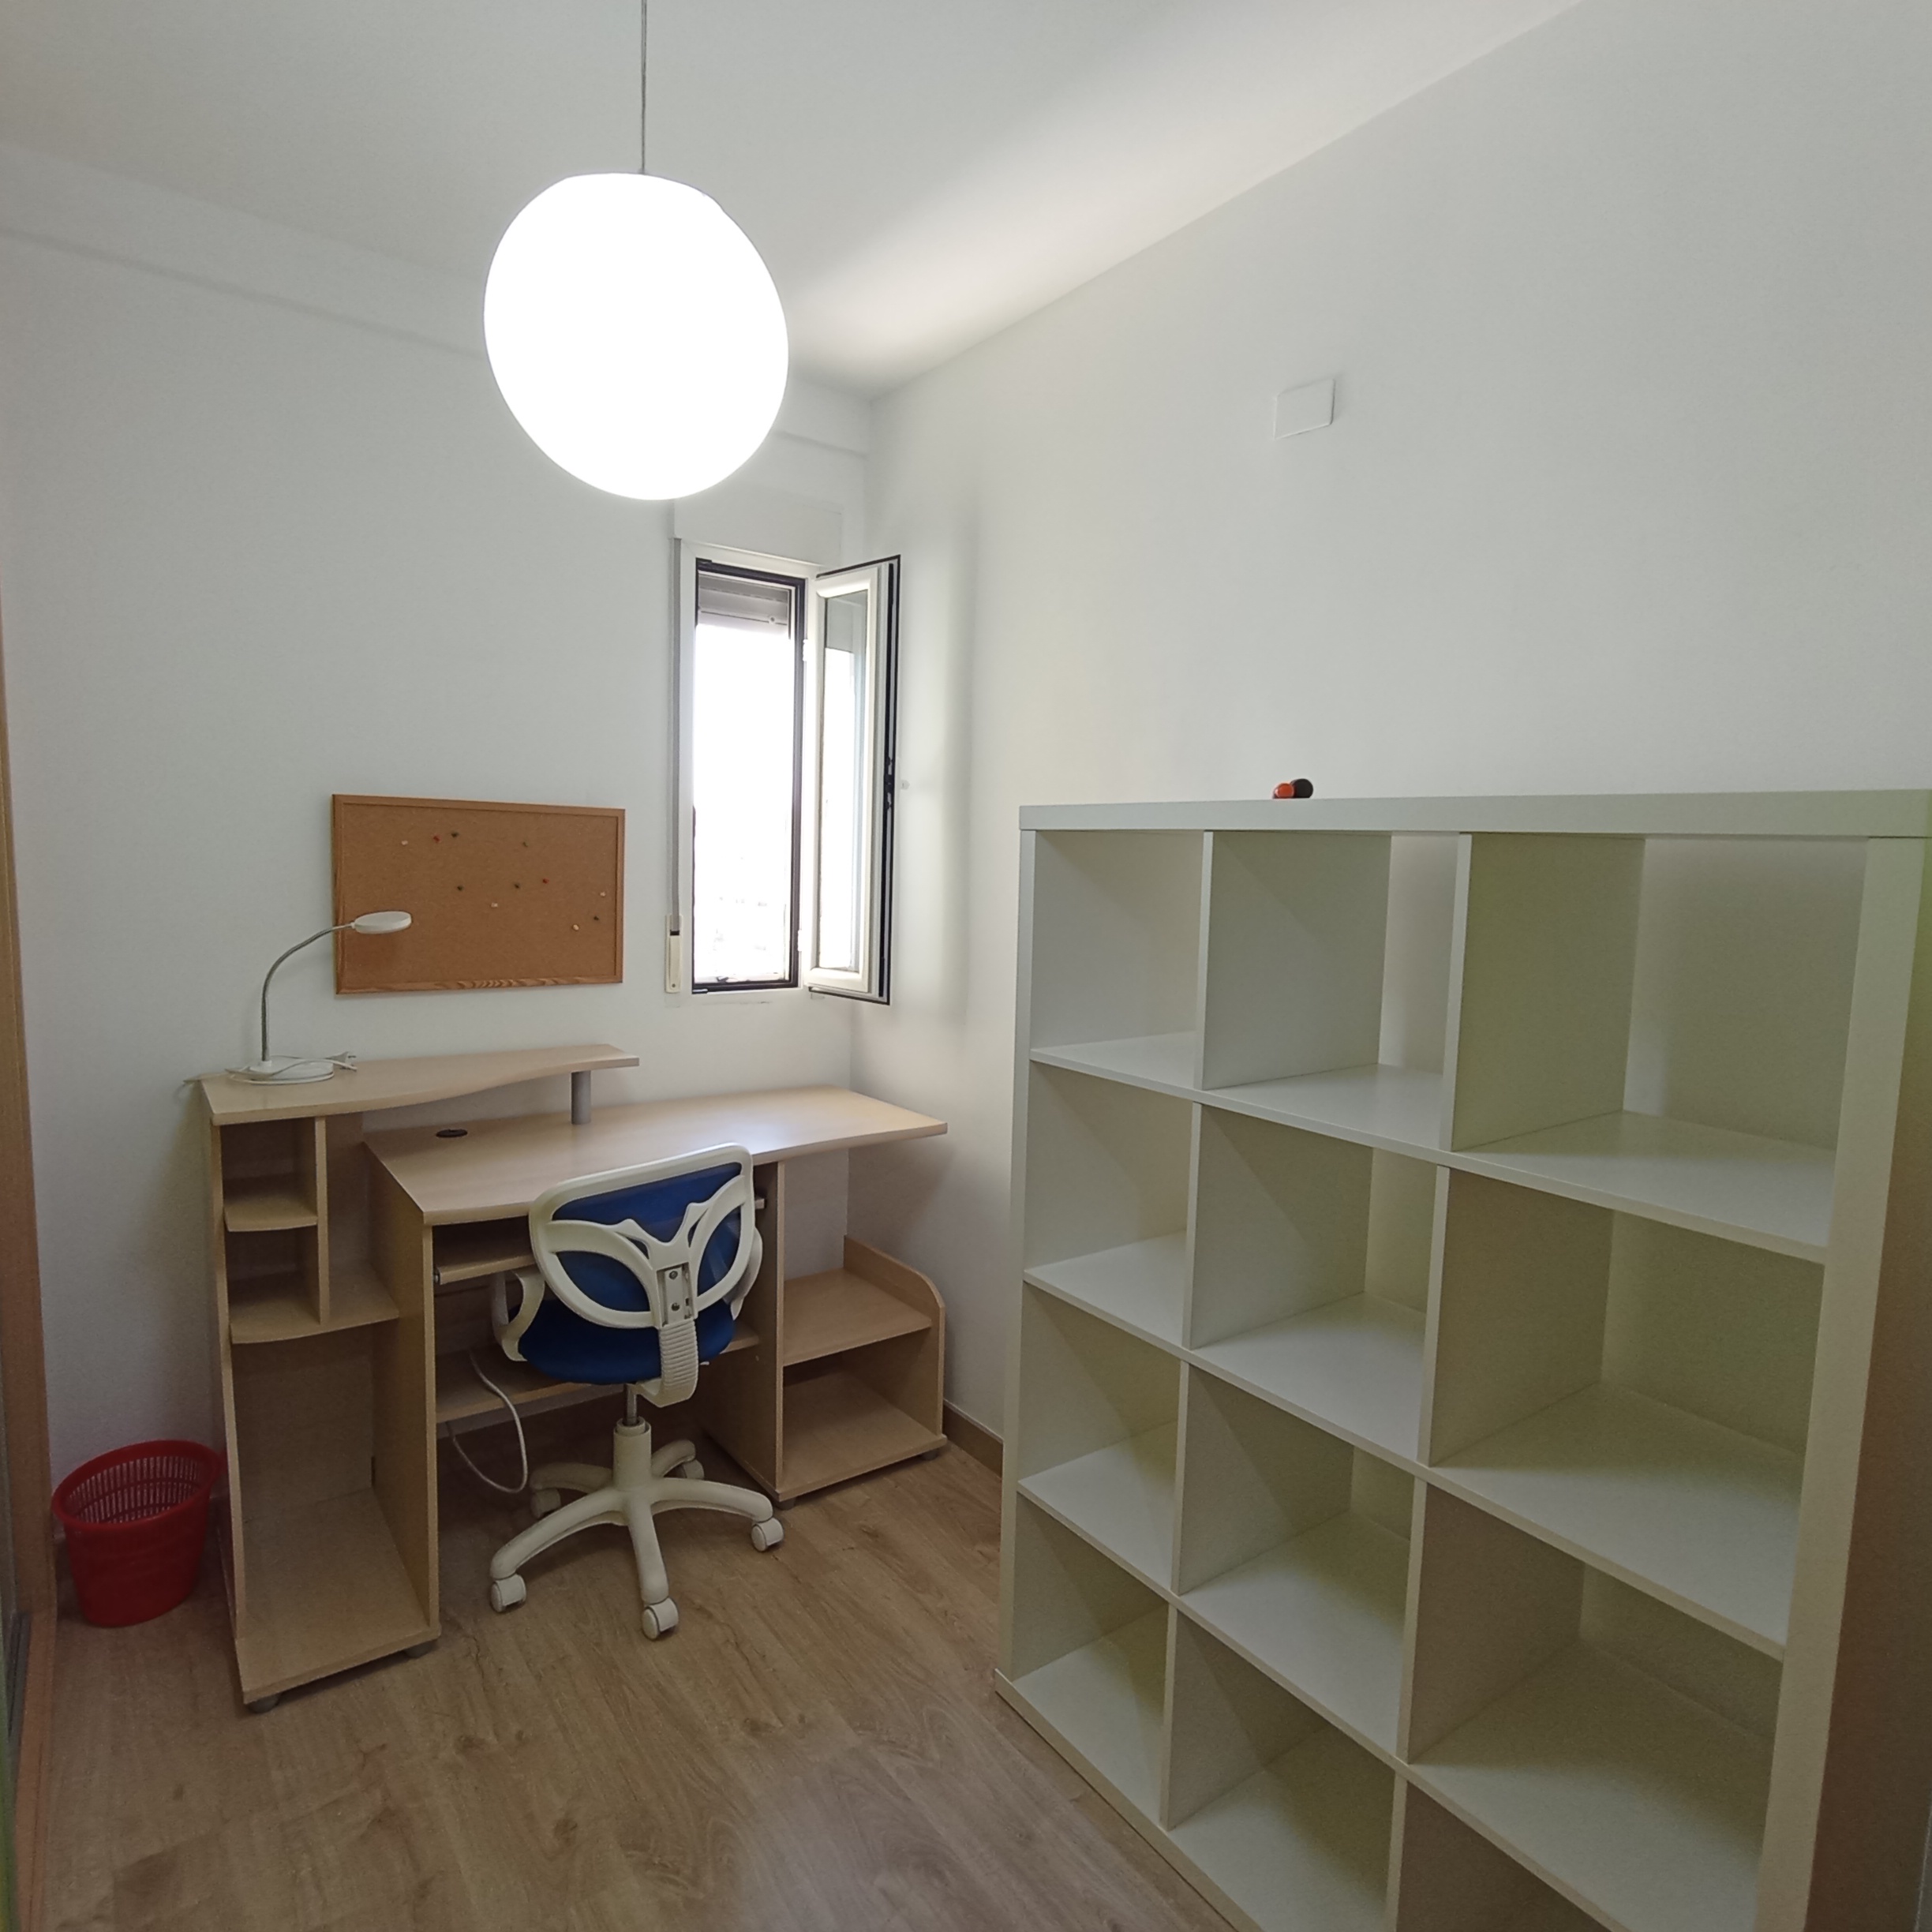 Escultor - 3 Bedroom apartment for rent in Valencia office 2